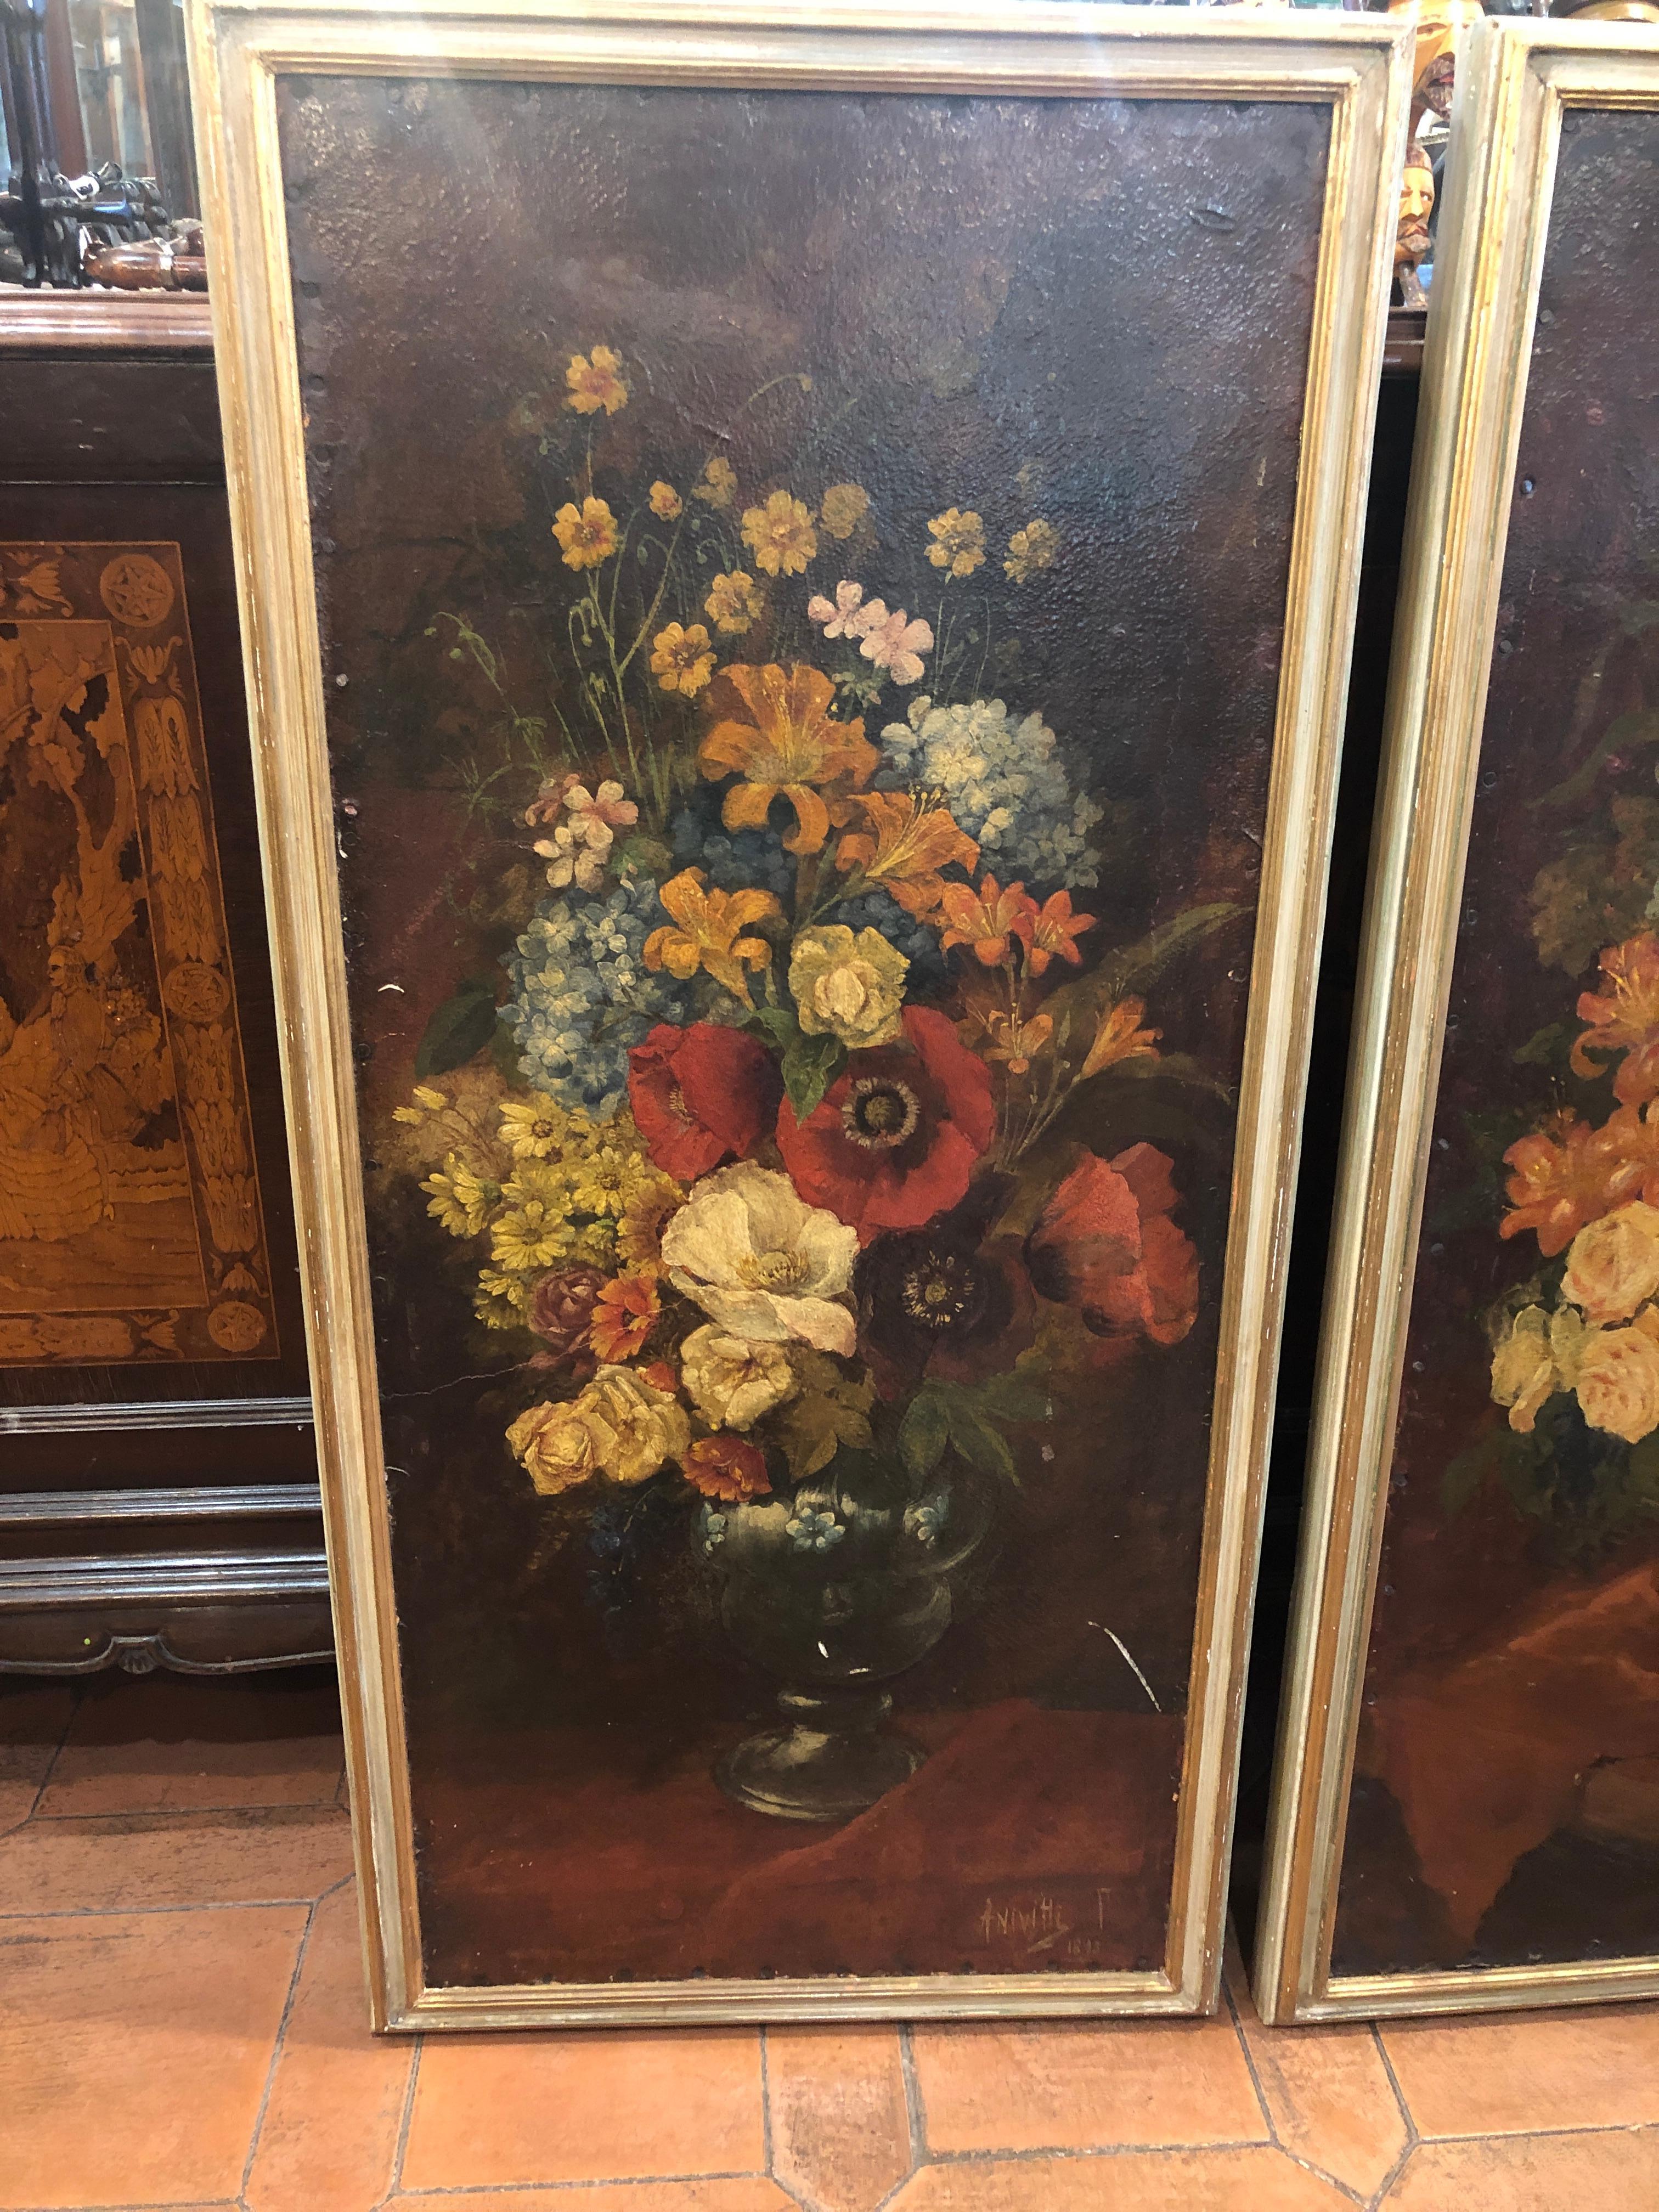 Filippo Anivitti (Roma, 4 dicembre 1876 – Roma, 4 agosto 1955) è stato un pittore italiano.
Pair of paintings, depicting vases with flowers. Signed and dated 